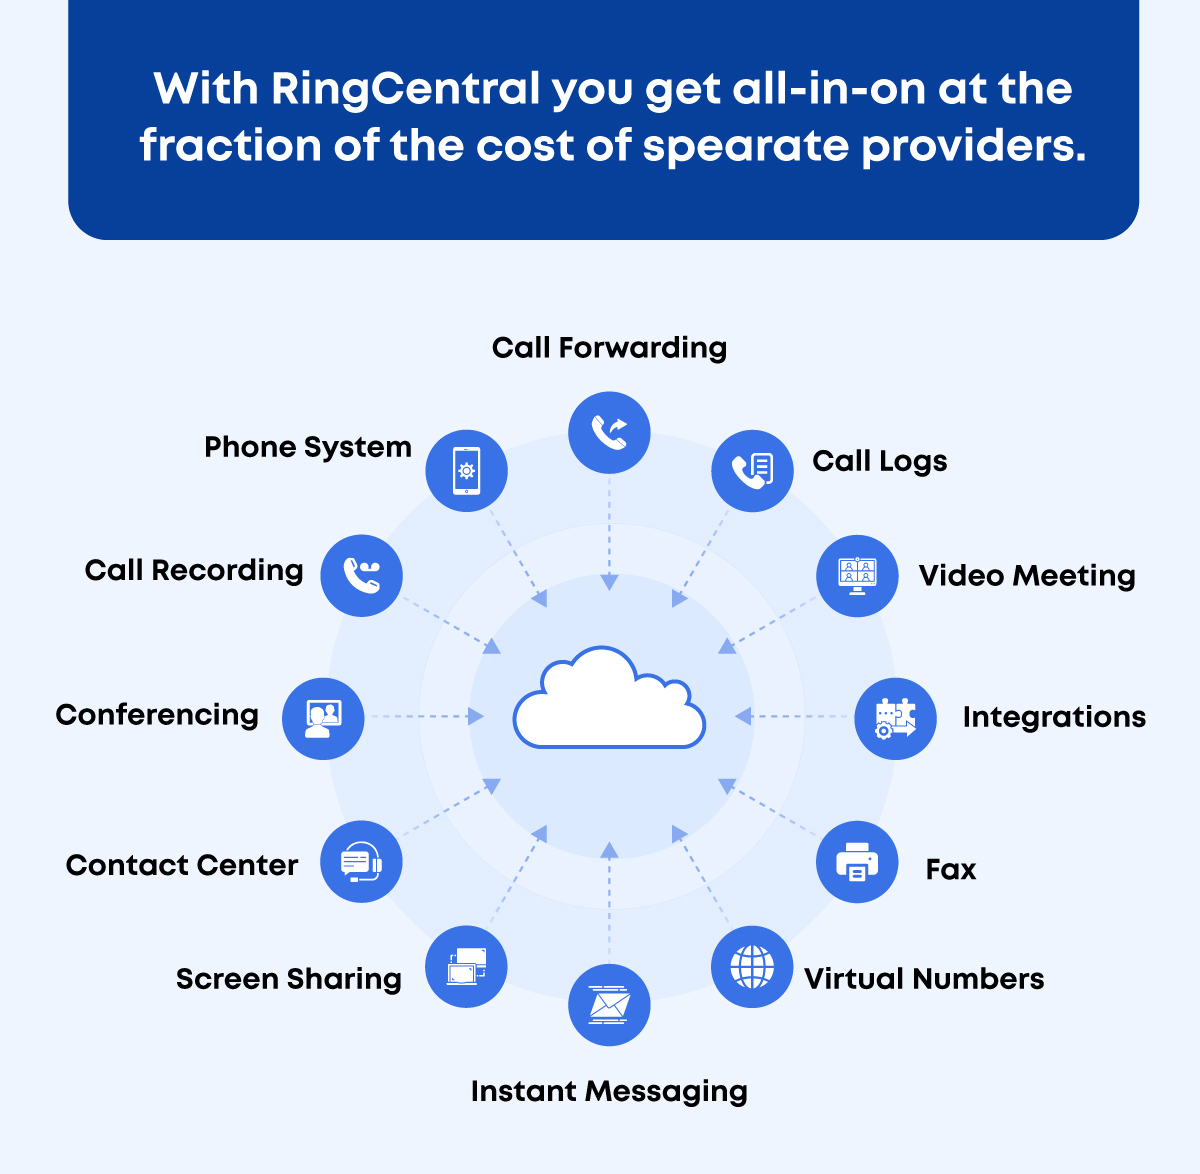 RingCentral VoIP business phone system features